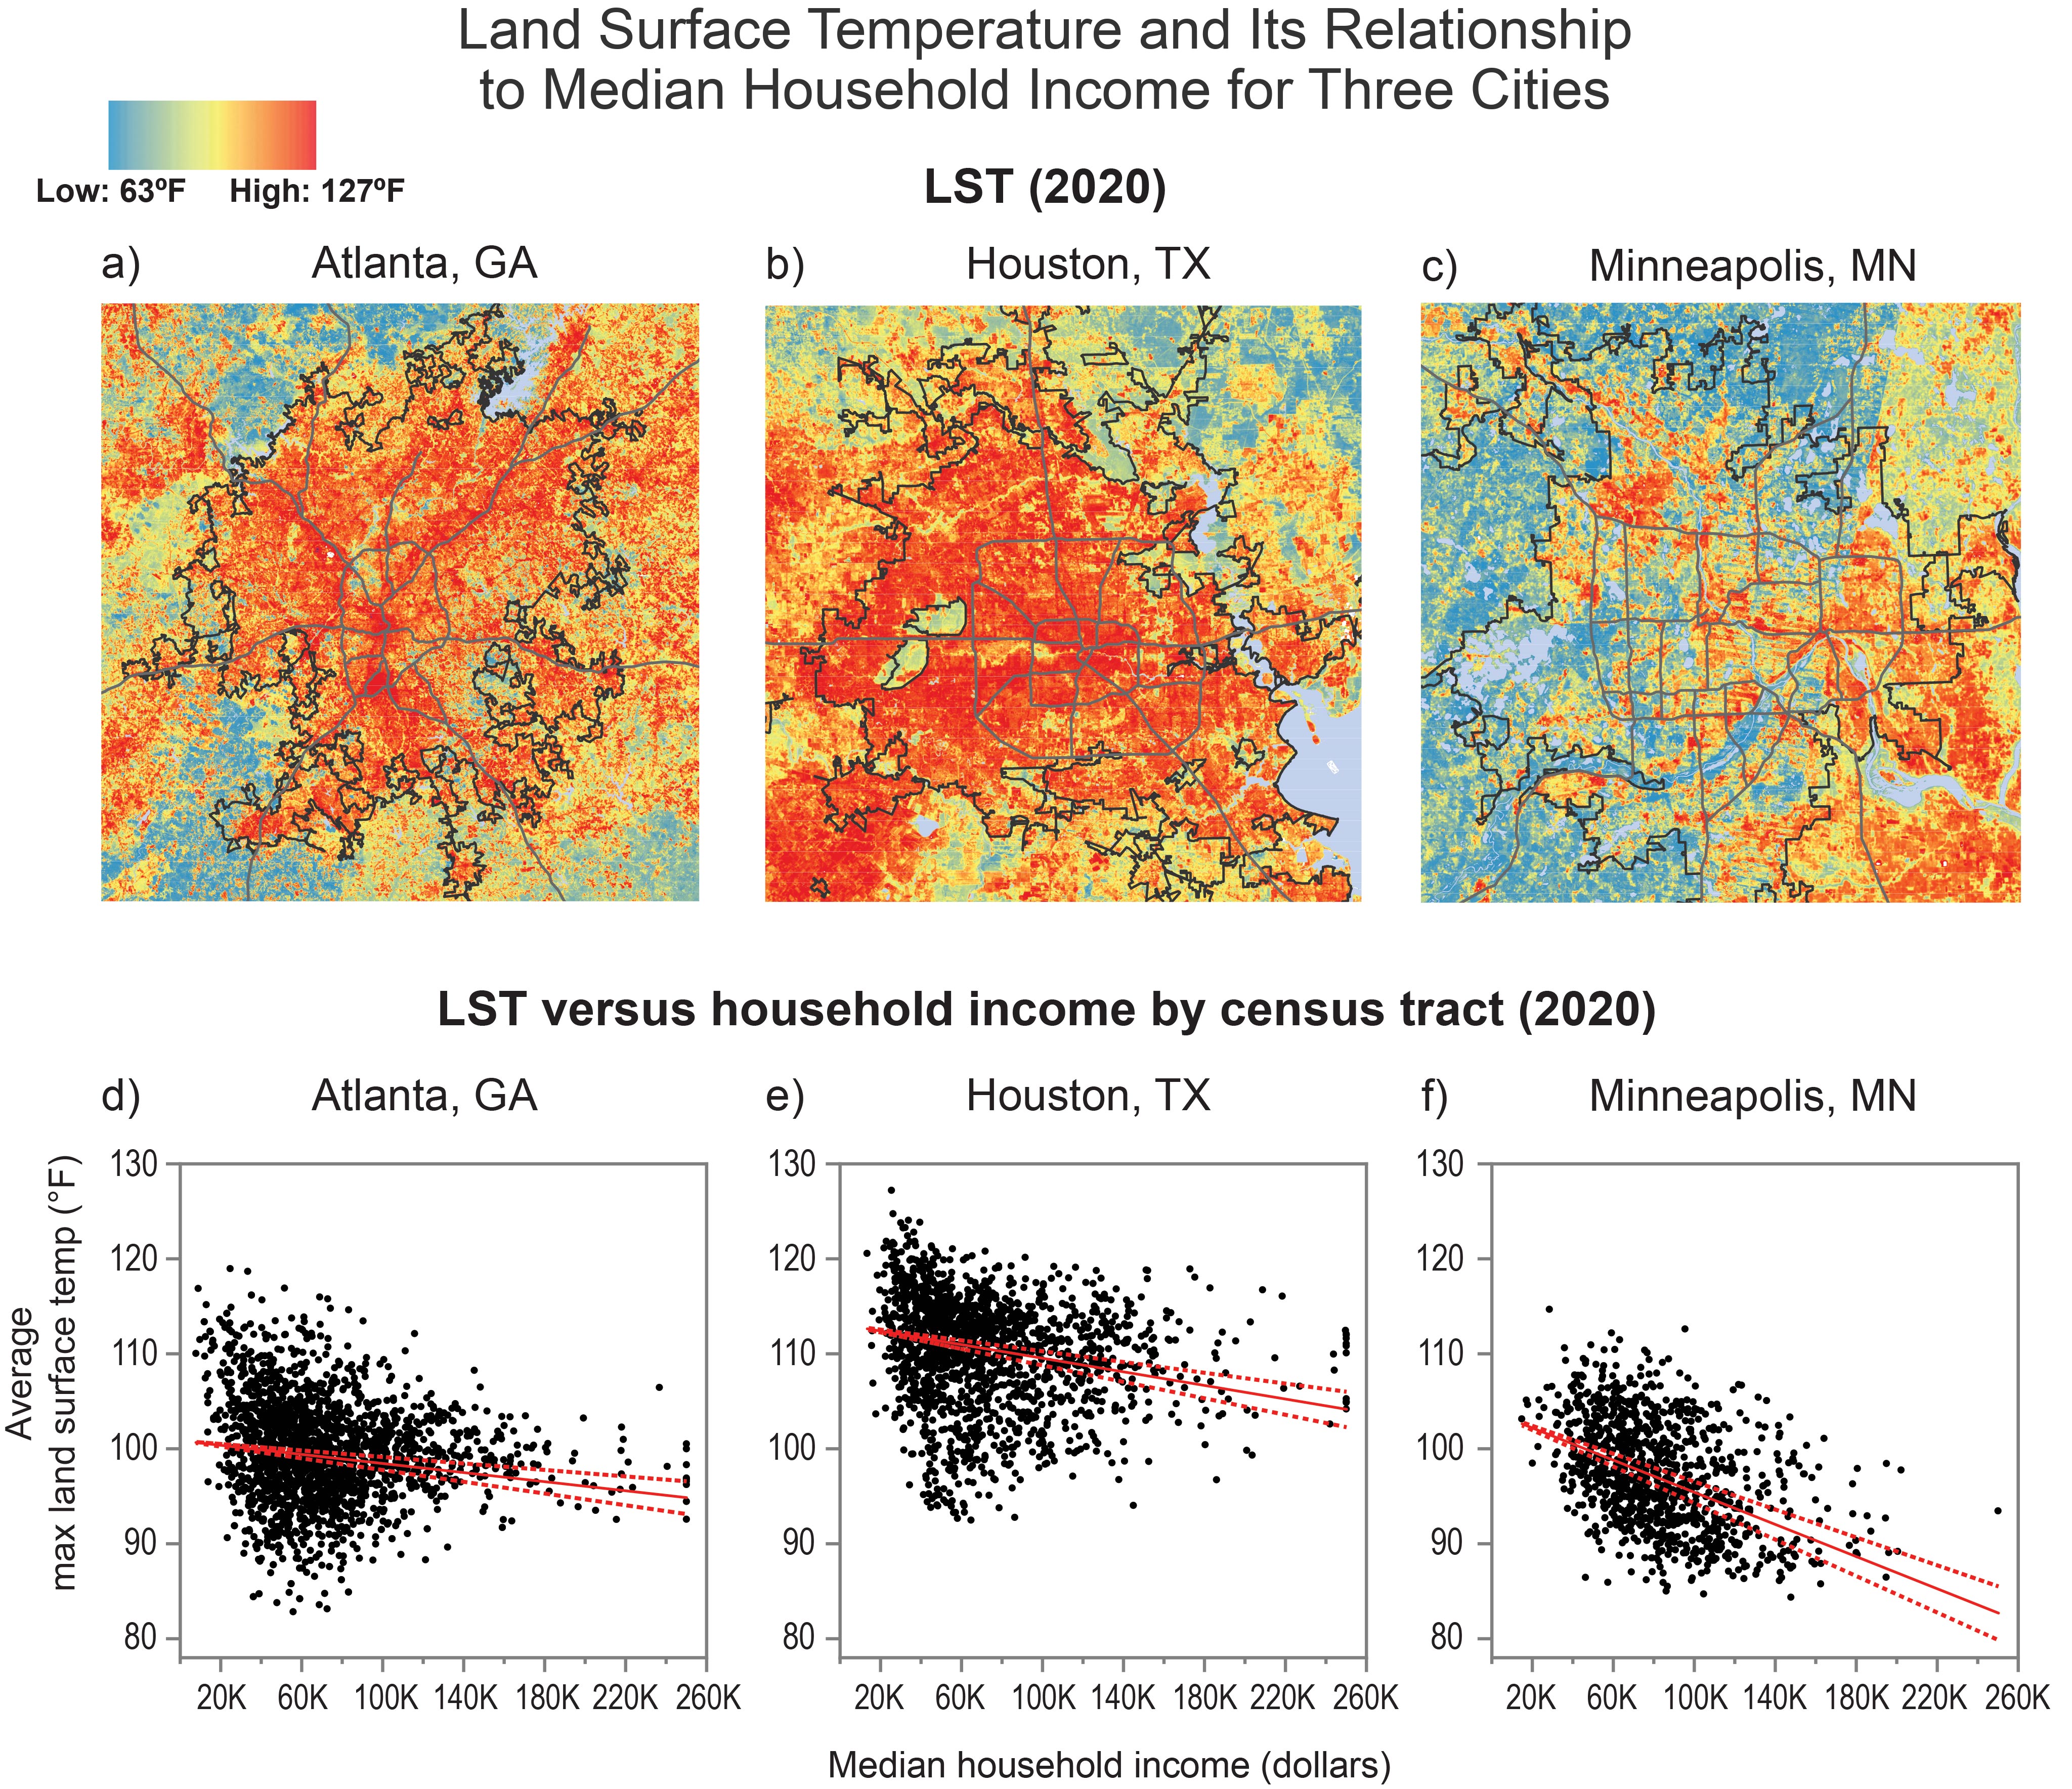 Land Surface Temperature and Its Relationship to Median Household Income for Three Cities